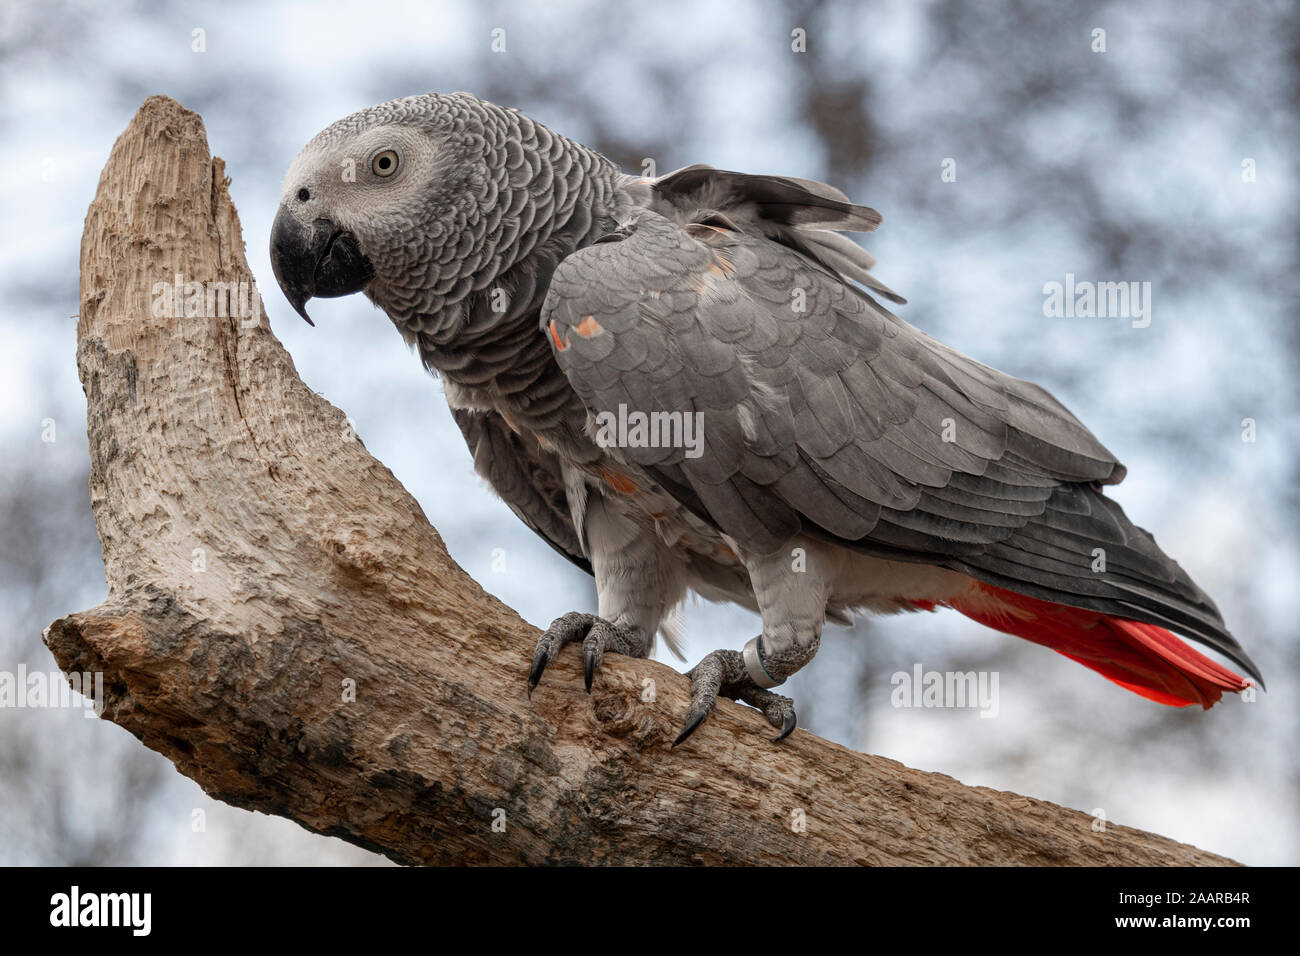 A grey parrot, also known as the Congo grey parrot, Congo African grey parrot or African grey parrot perched on a tree trunk Stock Photo